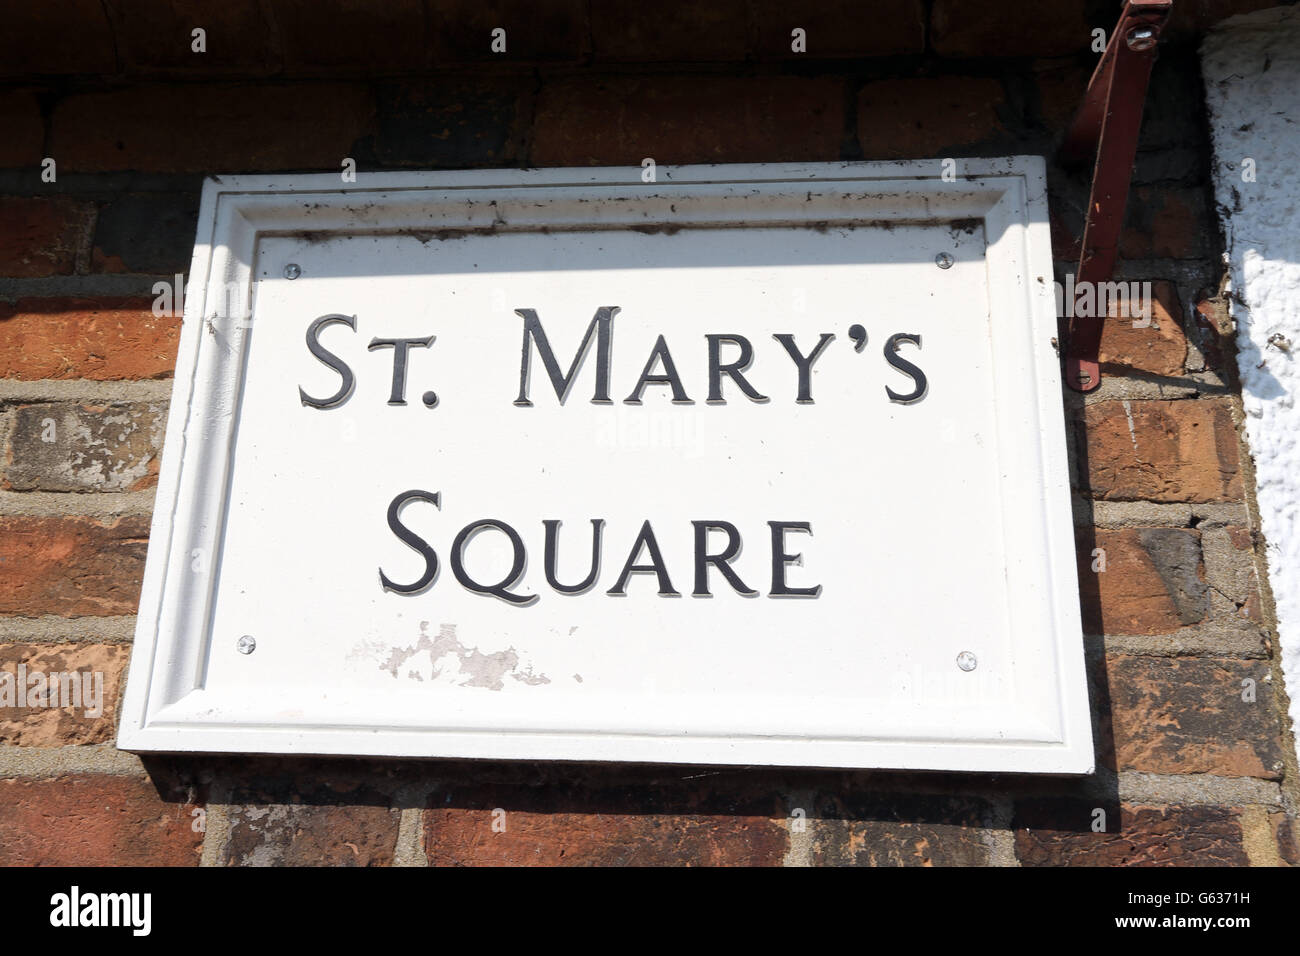 St Mary the Virgin church in Aylesbury, Buckinghamshire, where a man found a human ear was found yesterday while walking his dog in the graveyard. Stock Photo